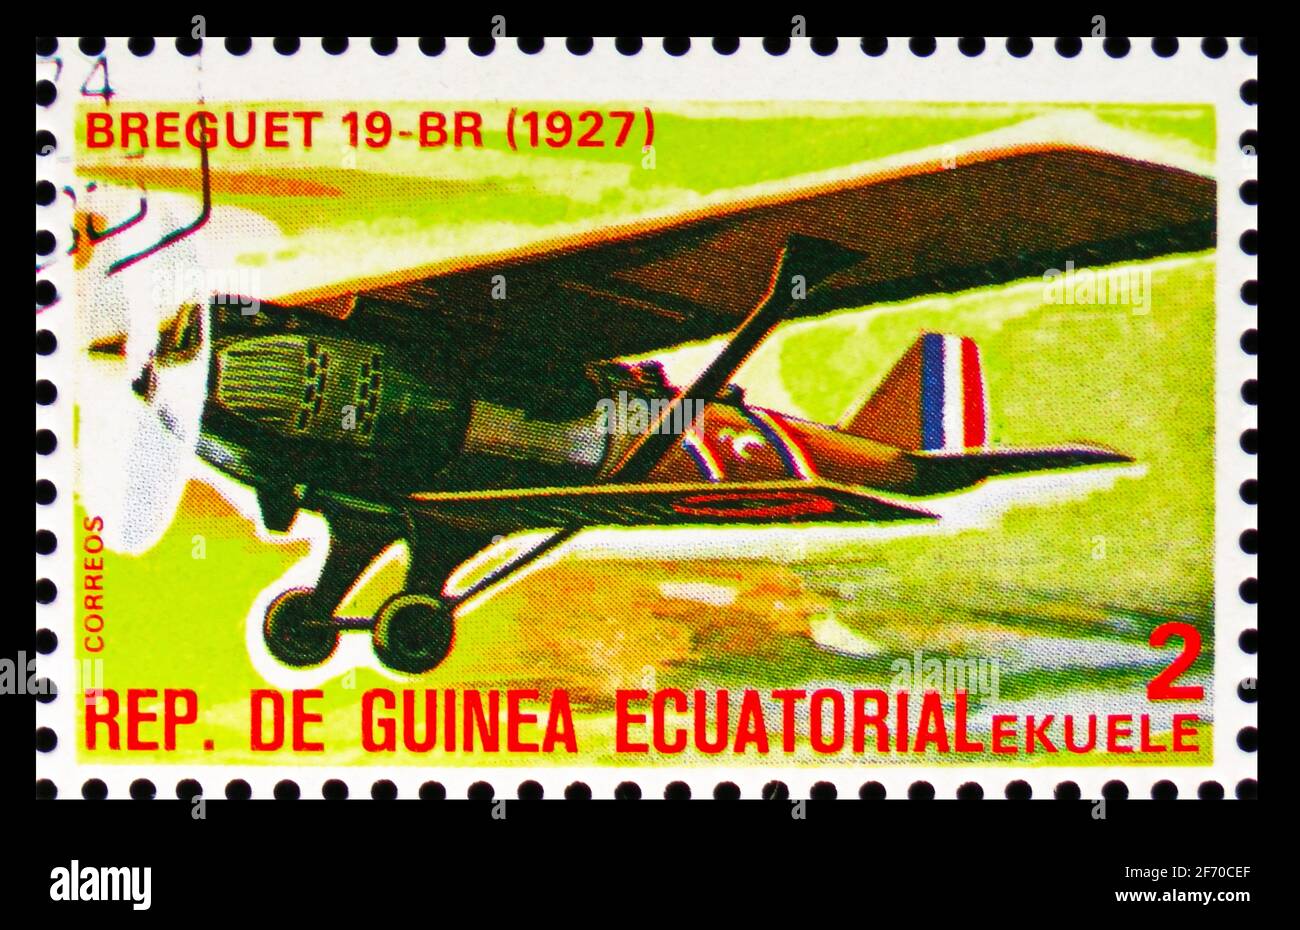 MOSCOW, RUSSIA - DECEMBER 19, 2020: Postage stamp printed in Equatorial Guinea shows Breguet 19-BR, Planes serie, circa 1979 Stock Photo